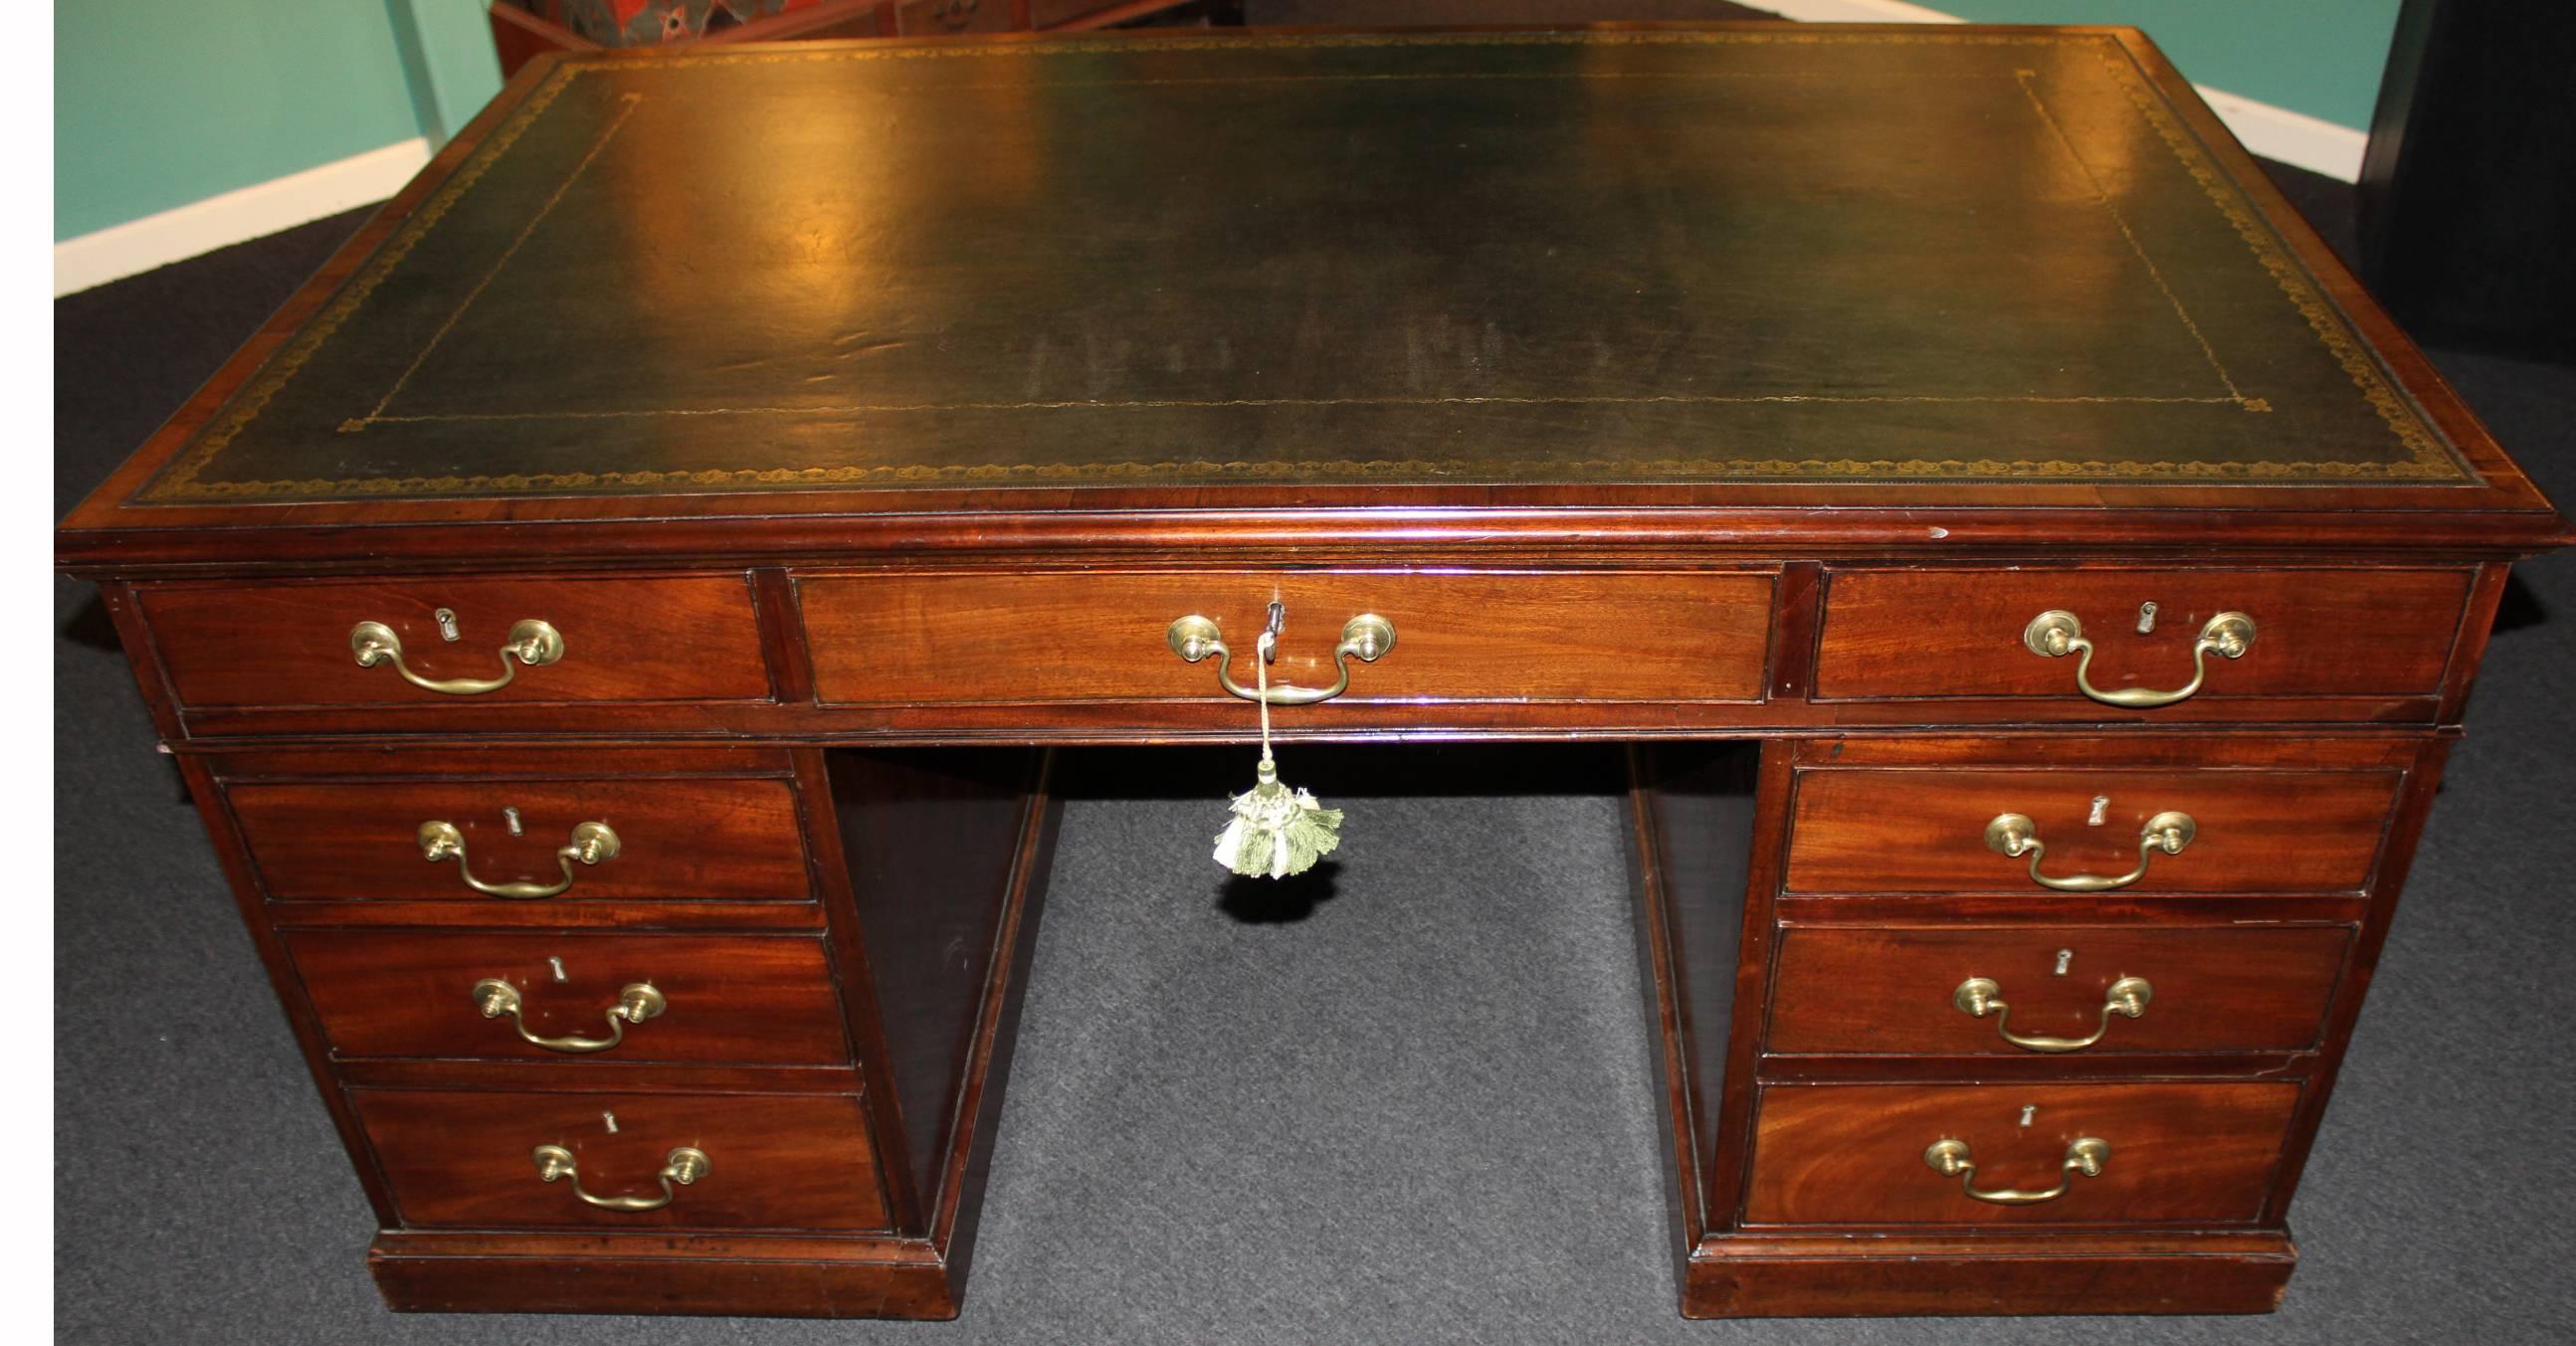 An exceptional Georgian English Chippendale mahogany partners desk. The rectangular top with gilt-tooled leather writing surface, above three frieze drawers, the same on reverse. The pedestal bases each with three drawers on both sides with bold